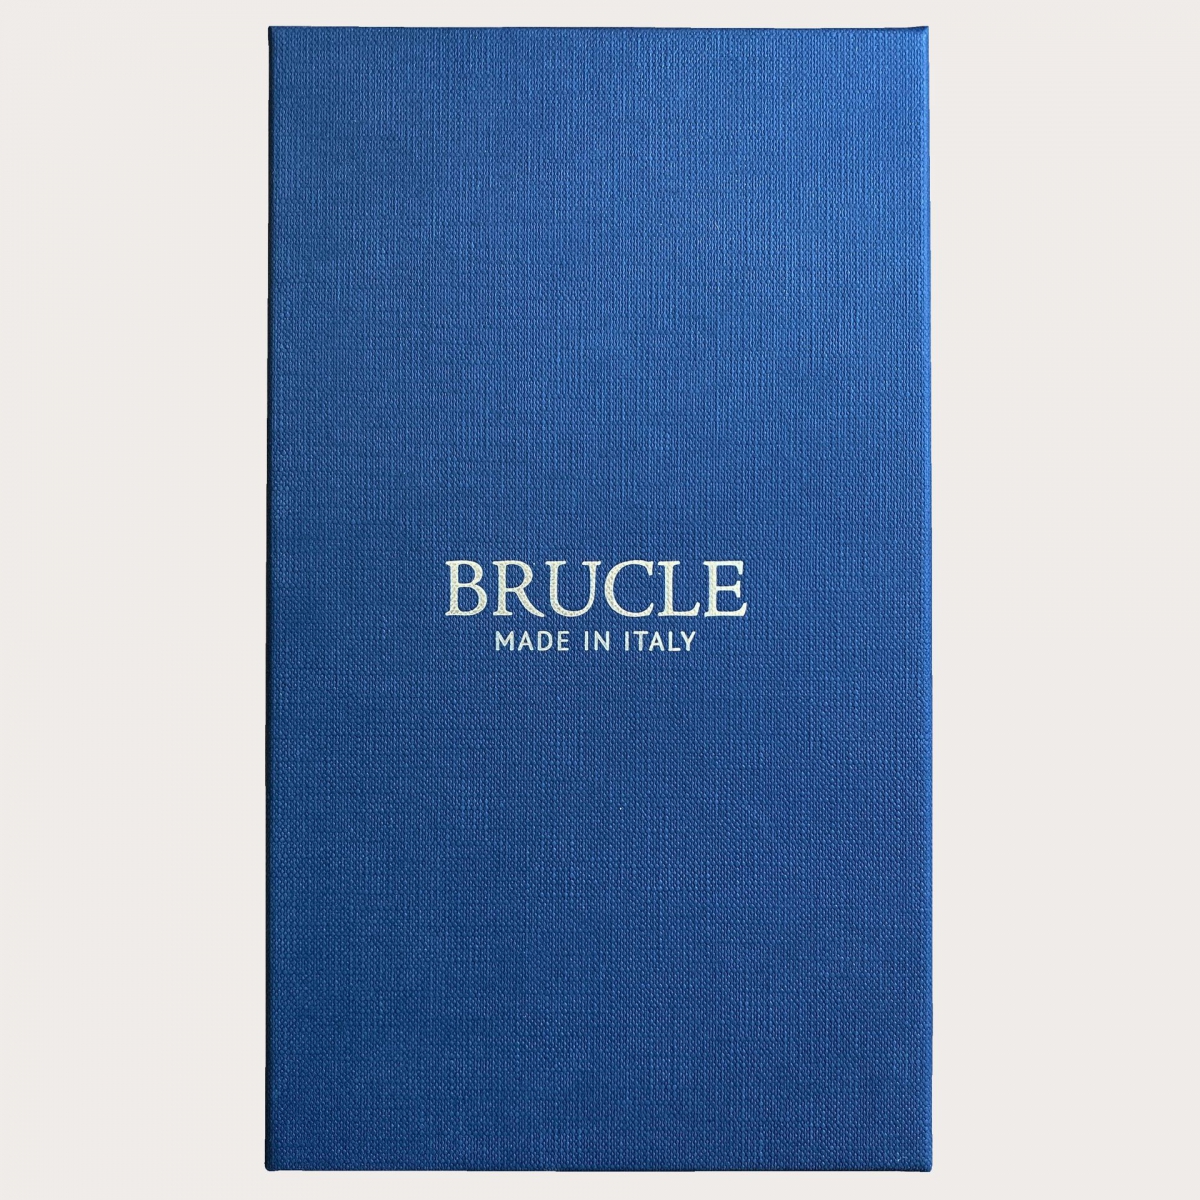 BRUCLE X-shaped braces for children and teenagers with stripes, burgundy and pearl